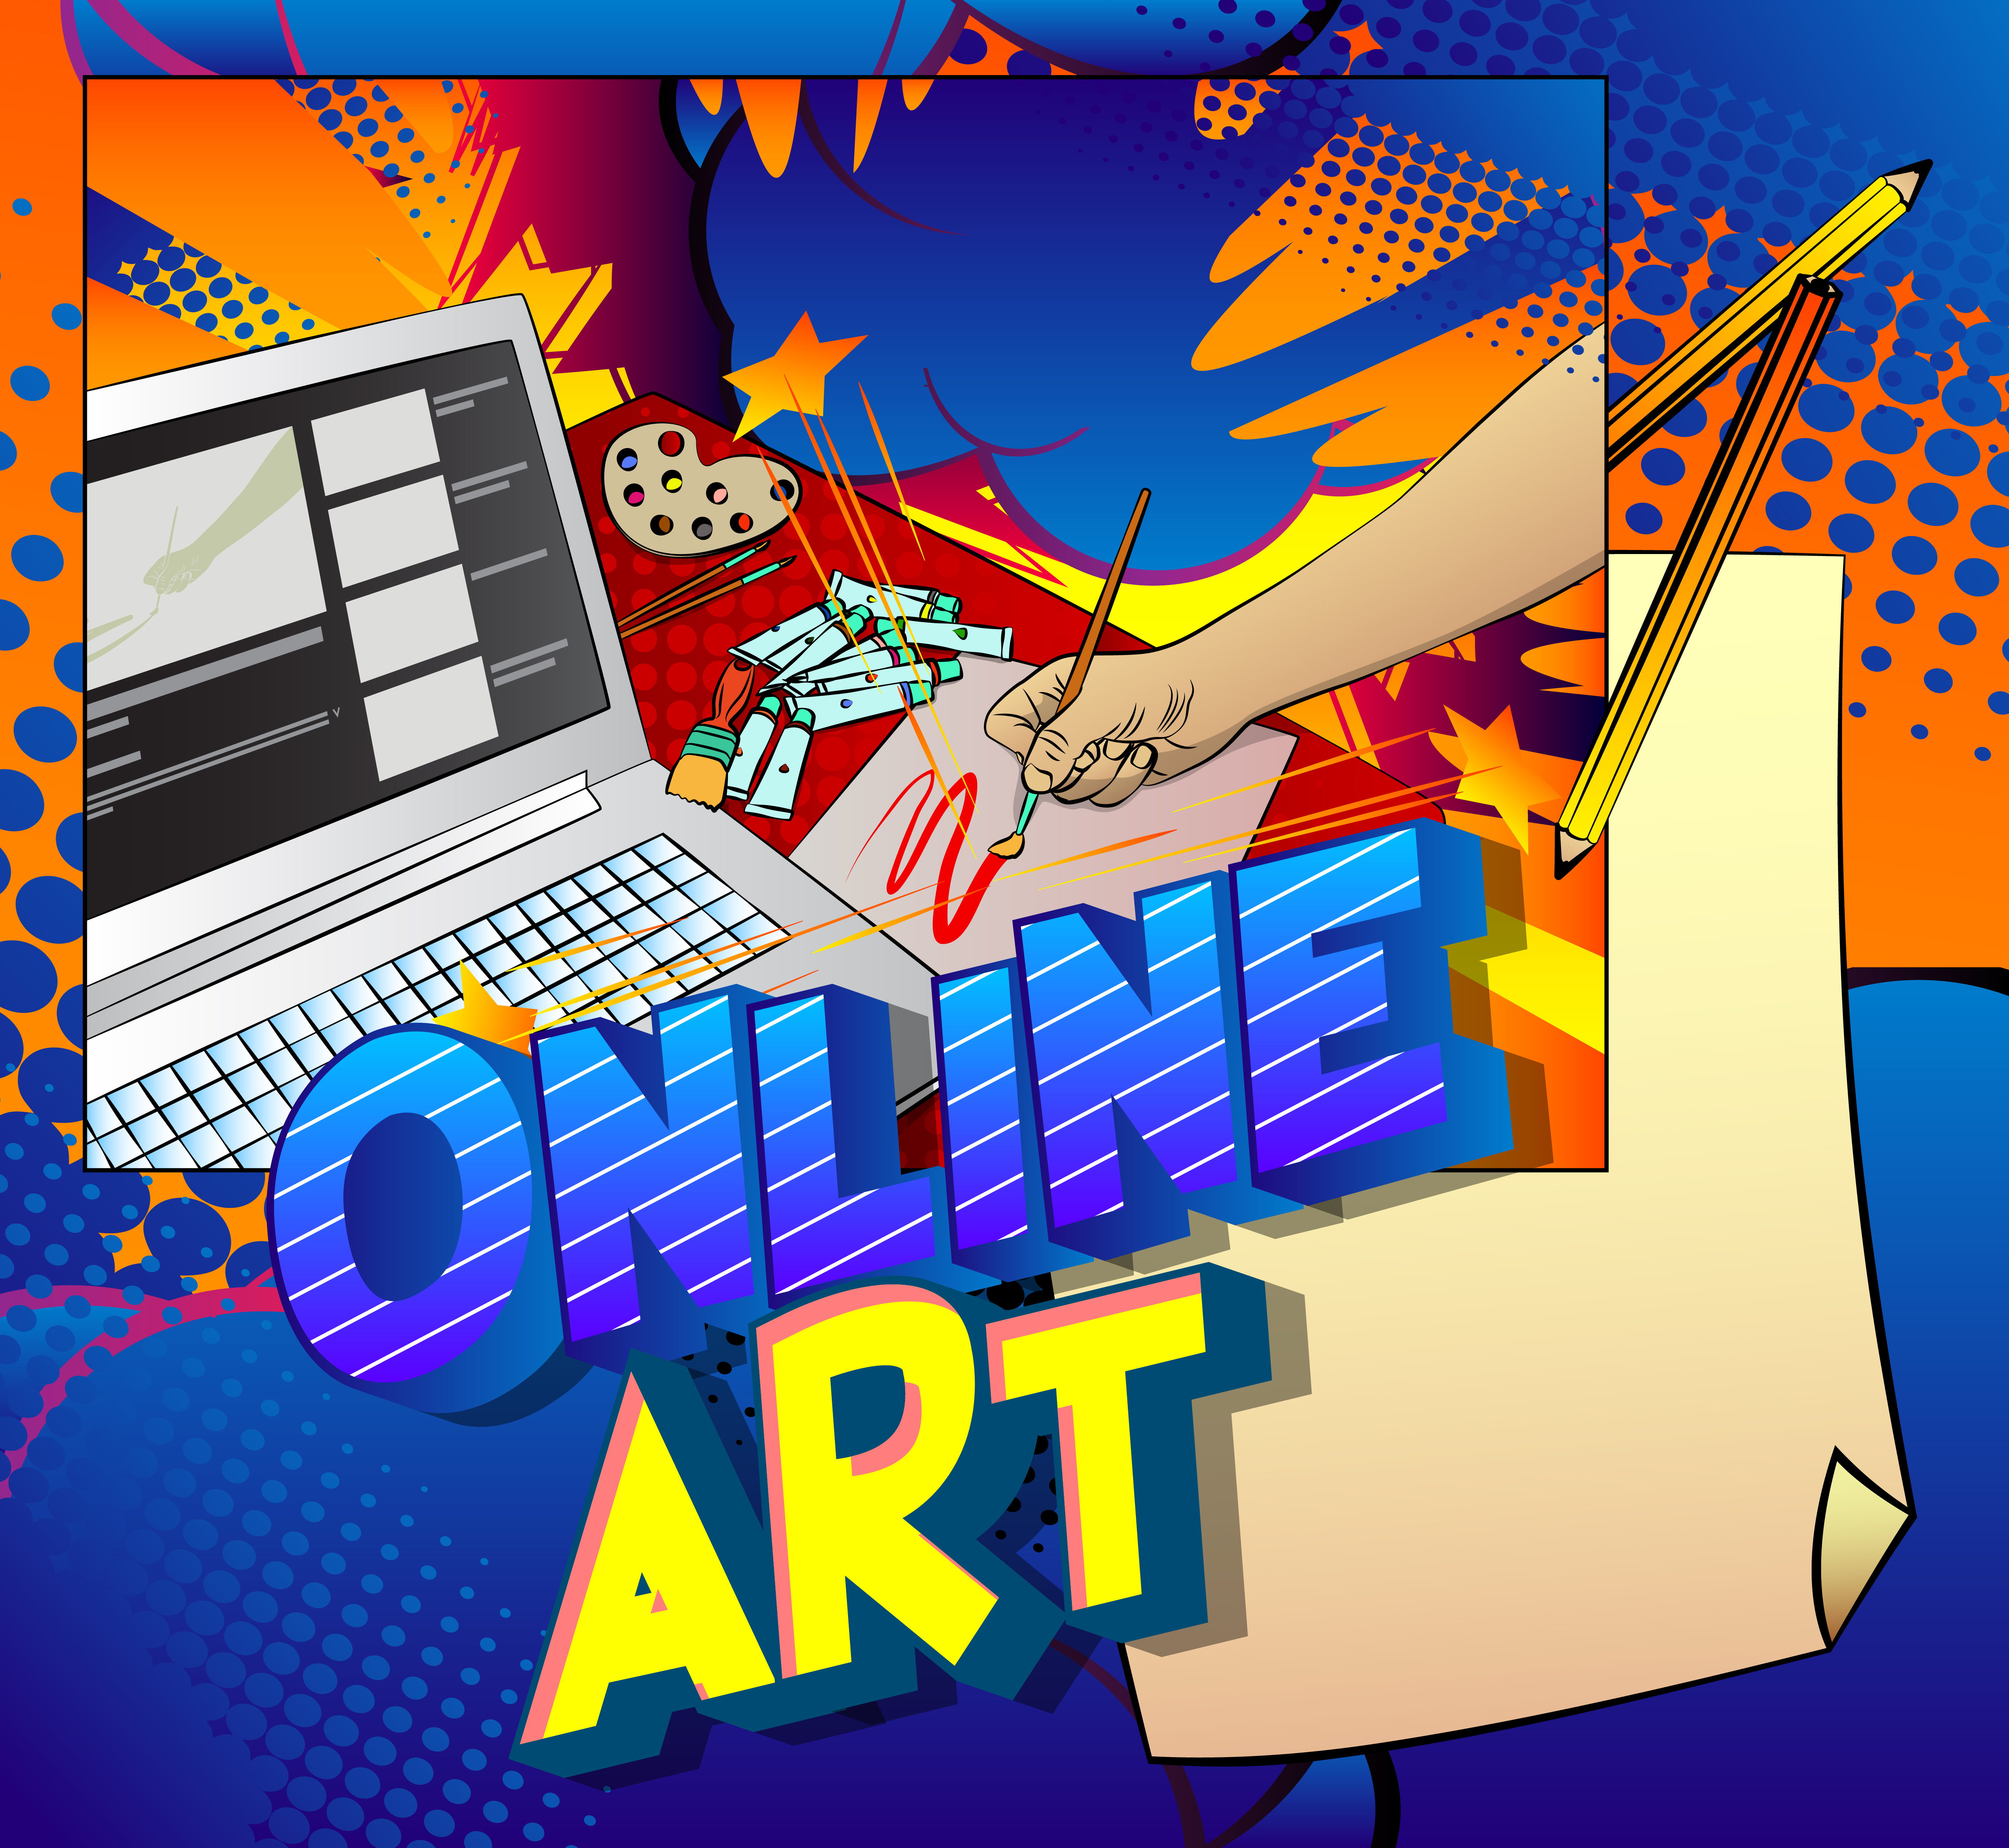 Comic book style poster for distance art education concept with Online Art text. Illustration of a comic book man learning to draw online.